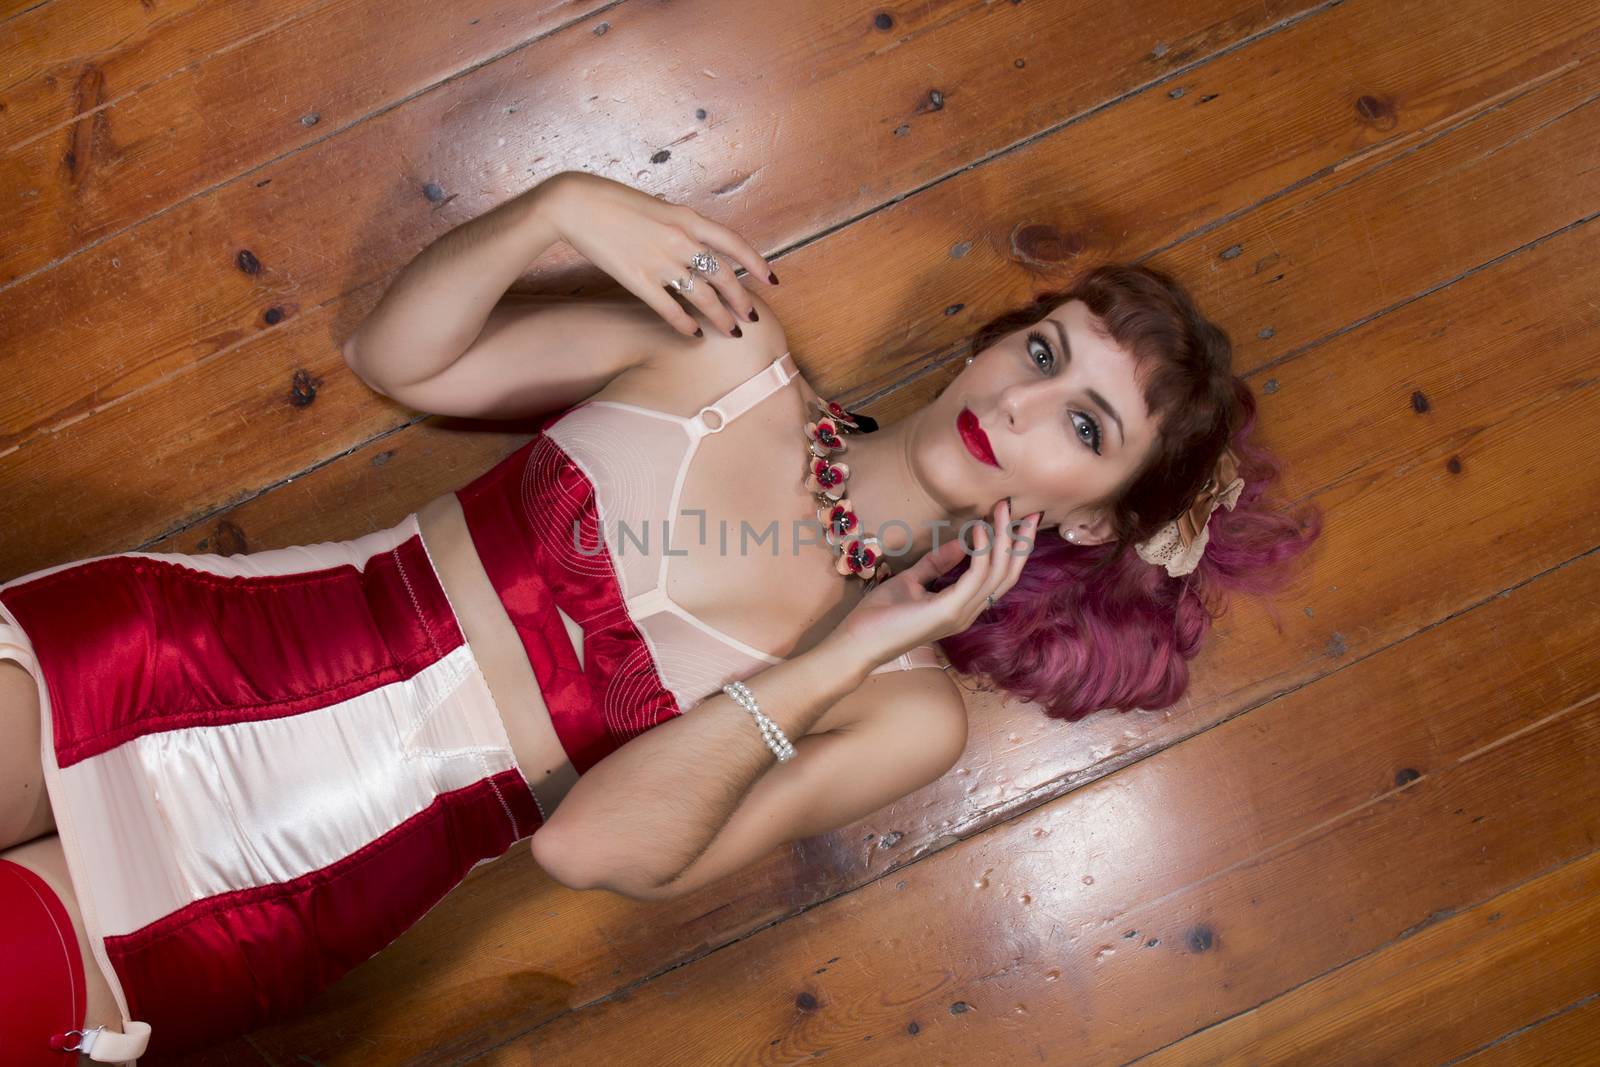 Girl with red vintage lingerie on a wooden floor.